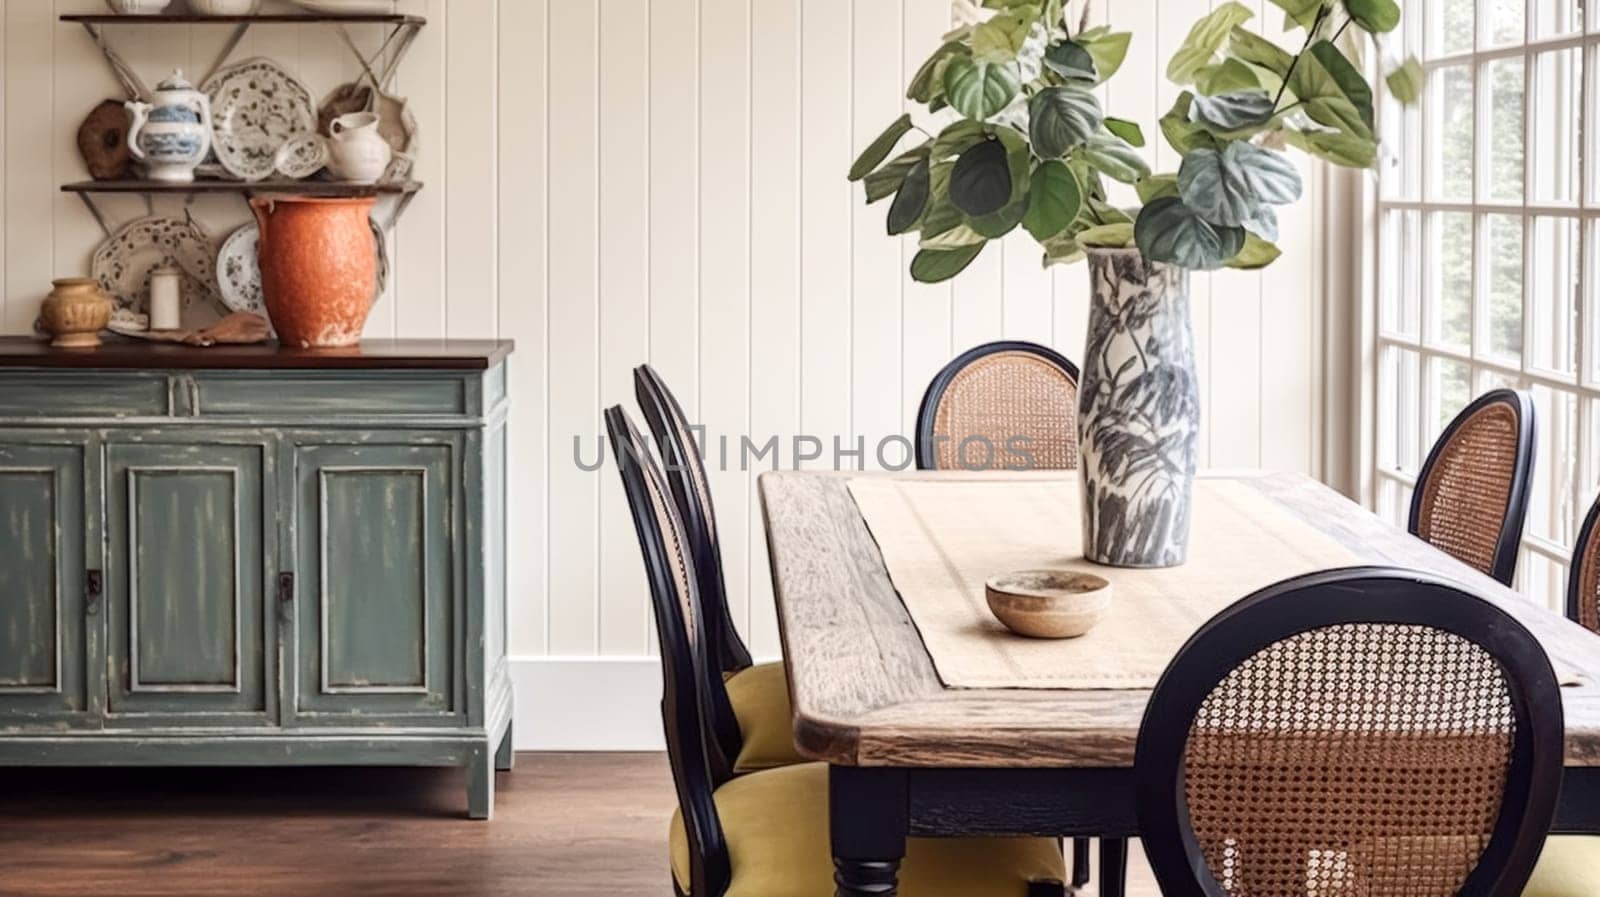 Wooden cottage dining room decor, interior design and country house furniture, home decor, table and chairs, English countryside style by Anneleven